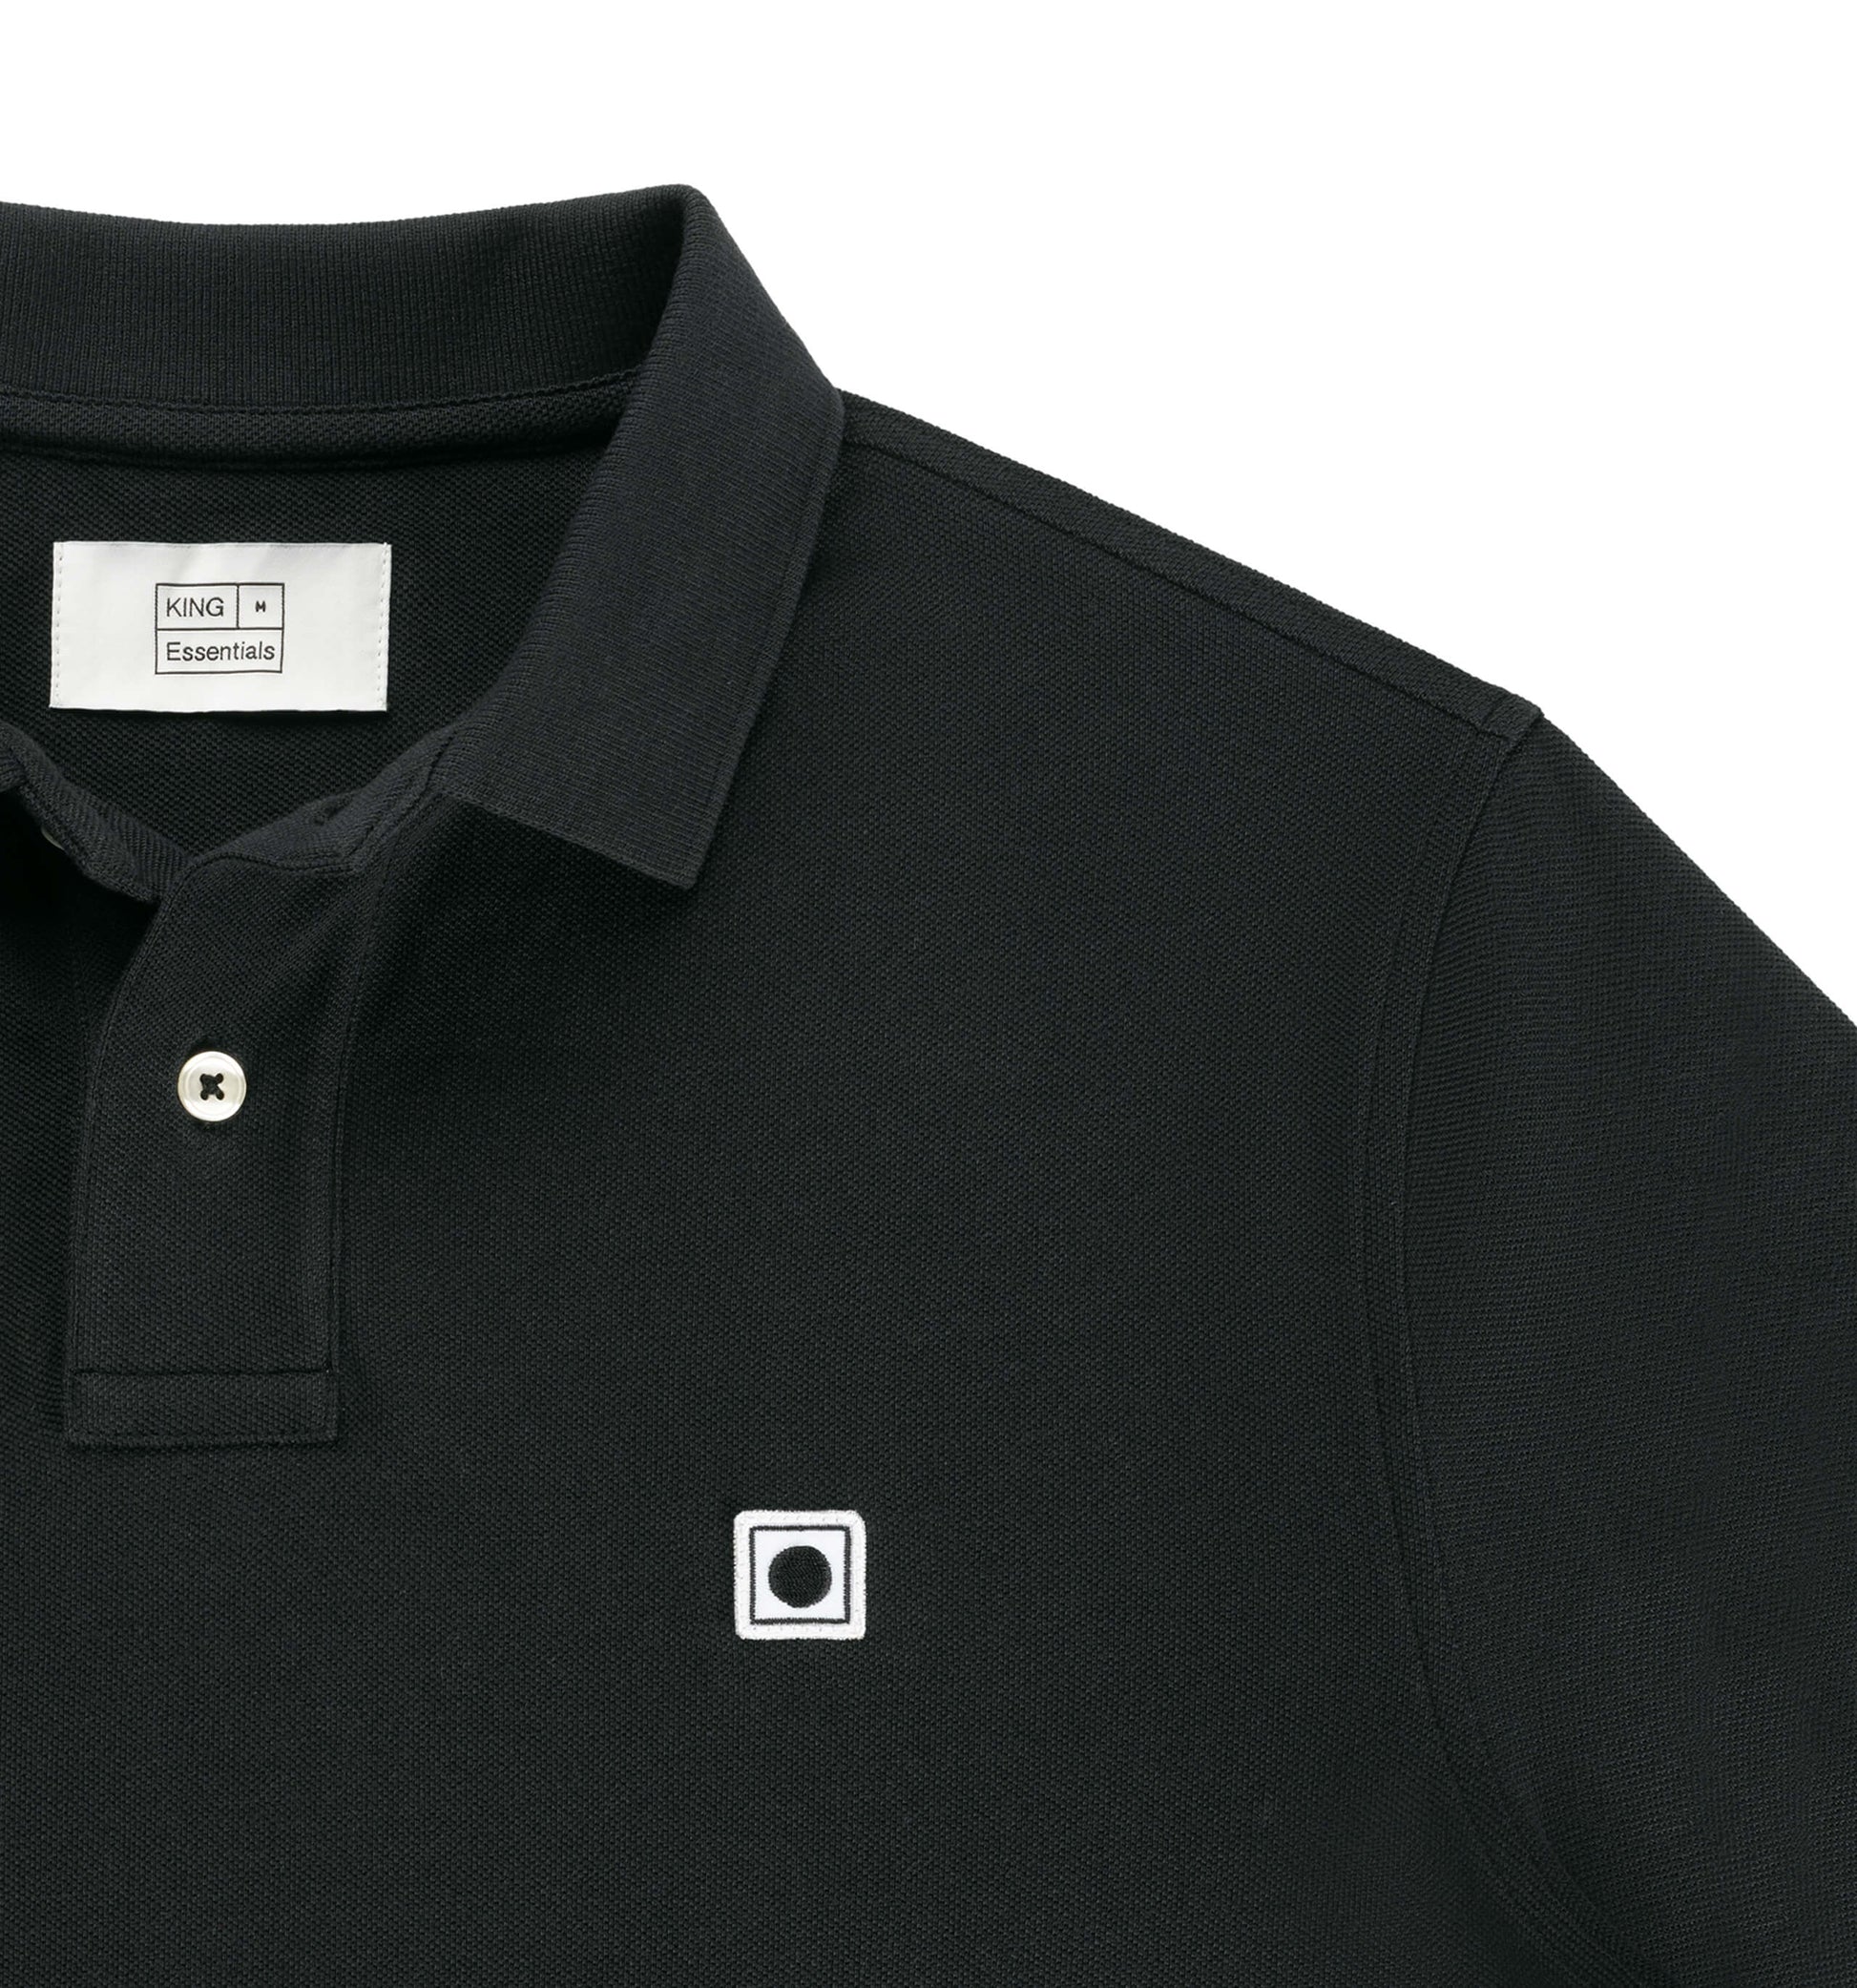 The Rene - Pique Polo In Black From King Essentials